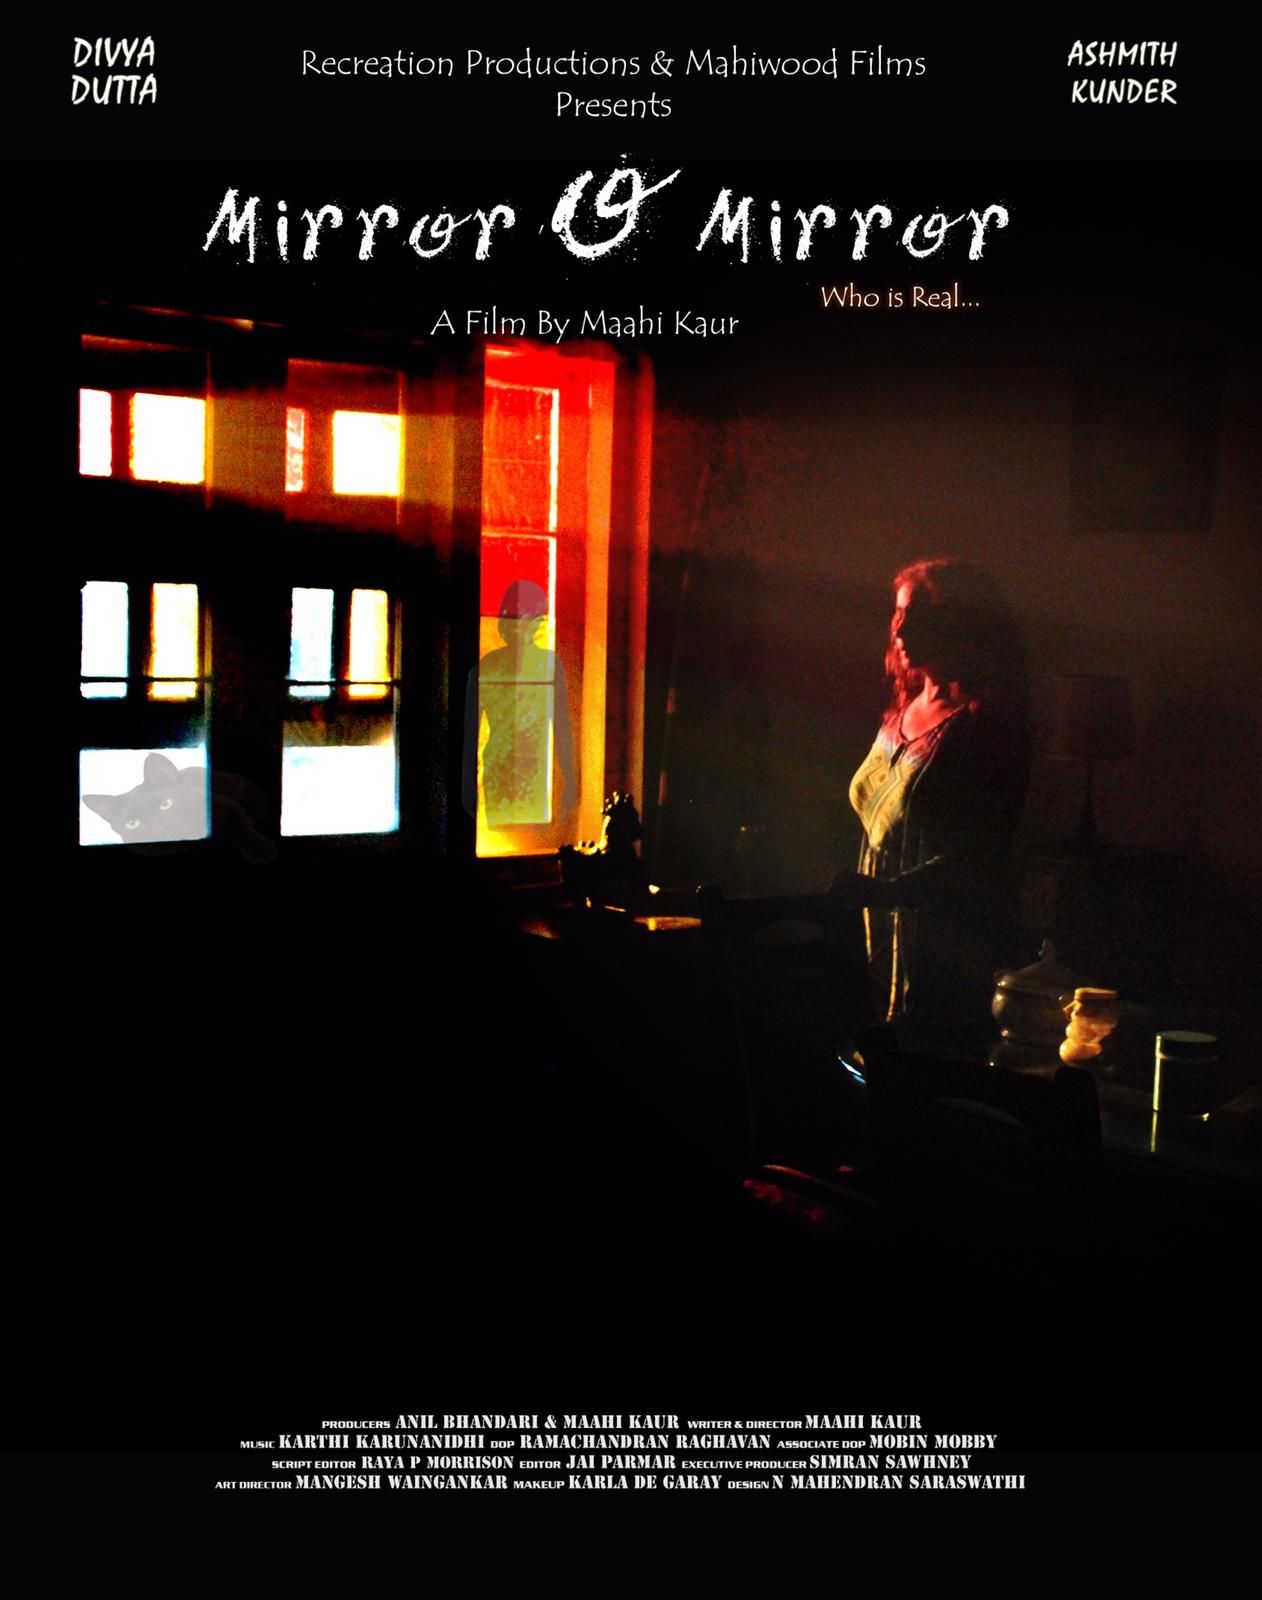 The First Look Of Divya Dutta's Mirror O Mirror Is Here To Haunt You